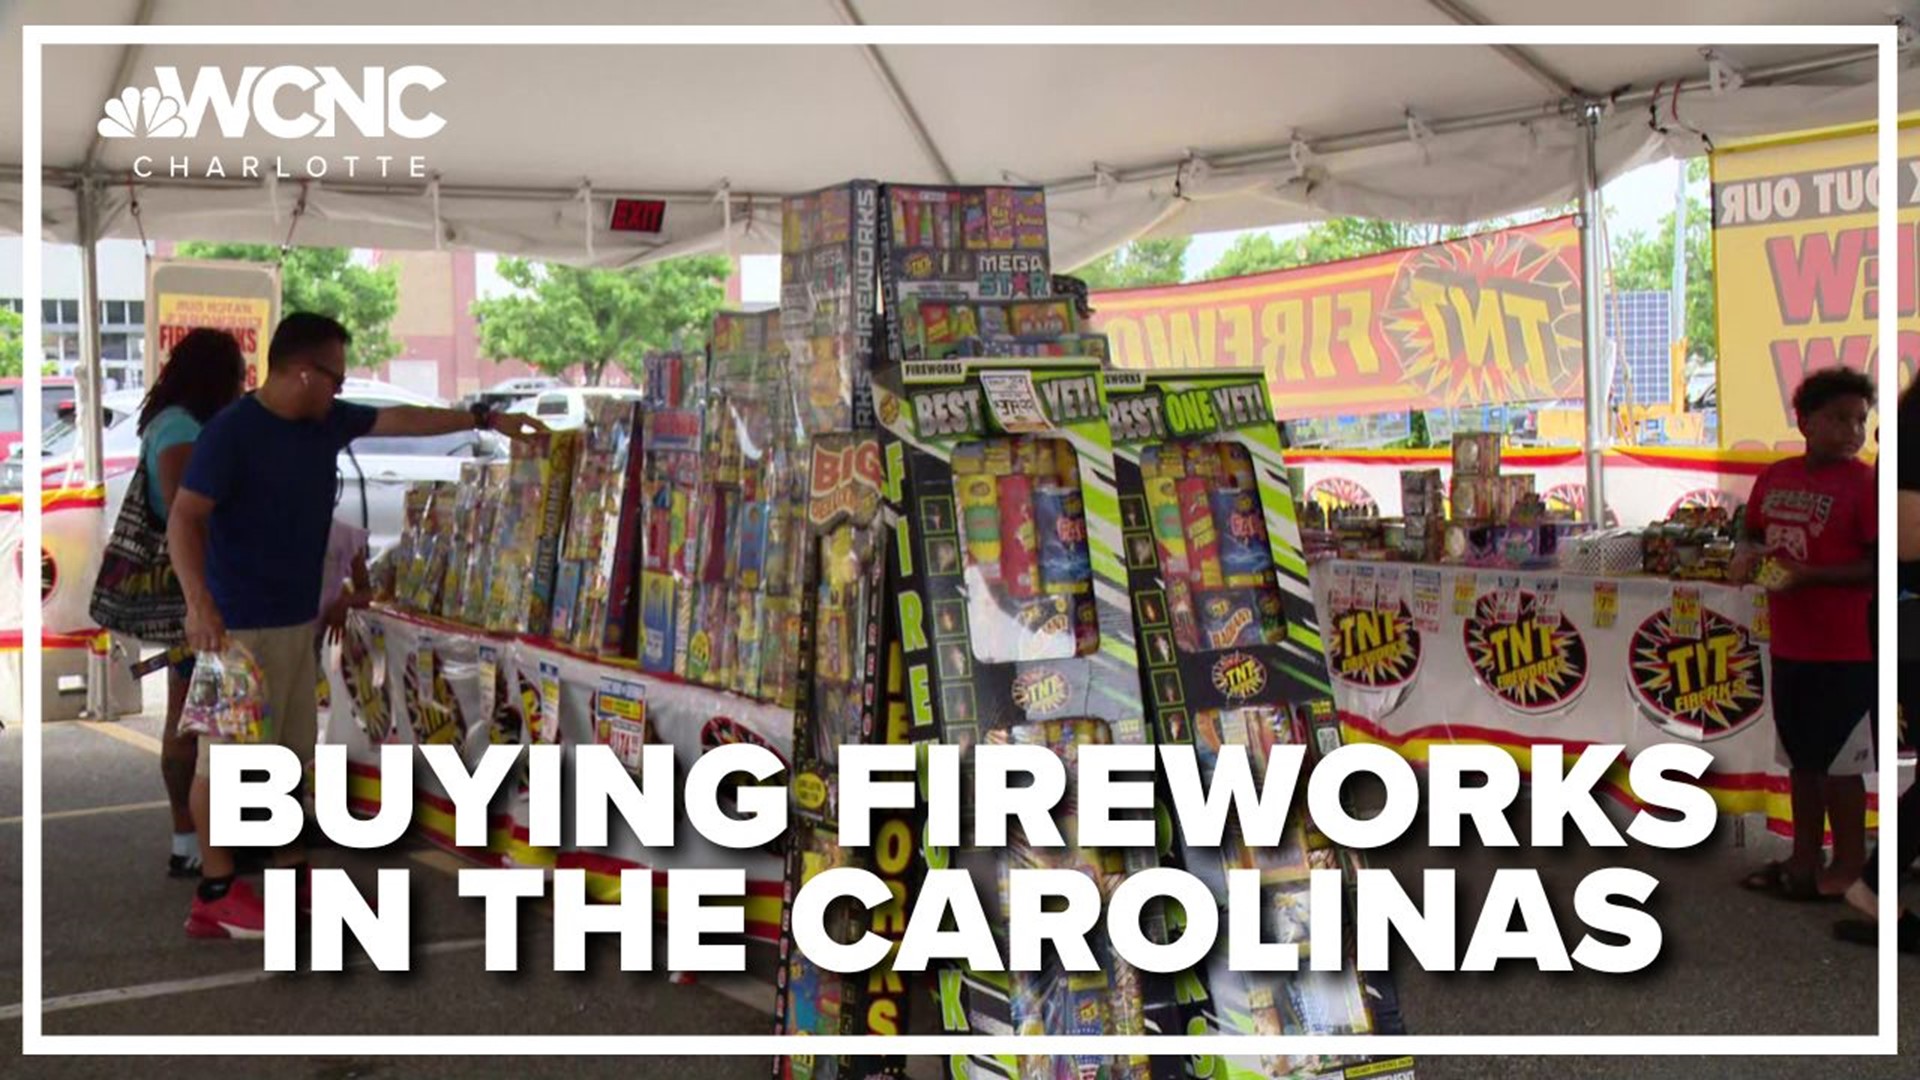 Unlike South Carolina, North Carolina has restrictions on fireworks sold that leave the ground and certain fireworks are illegal.